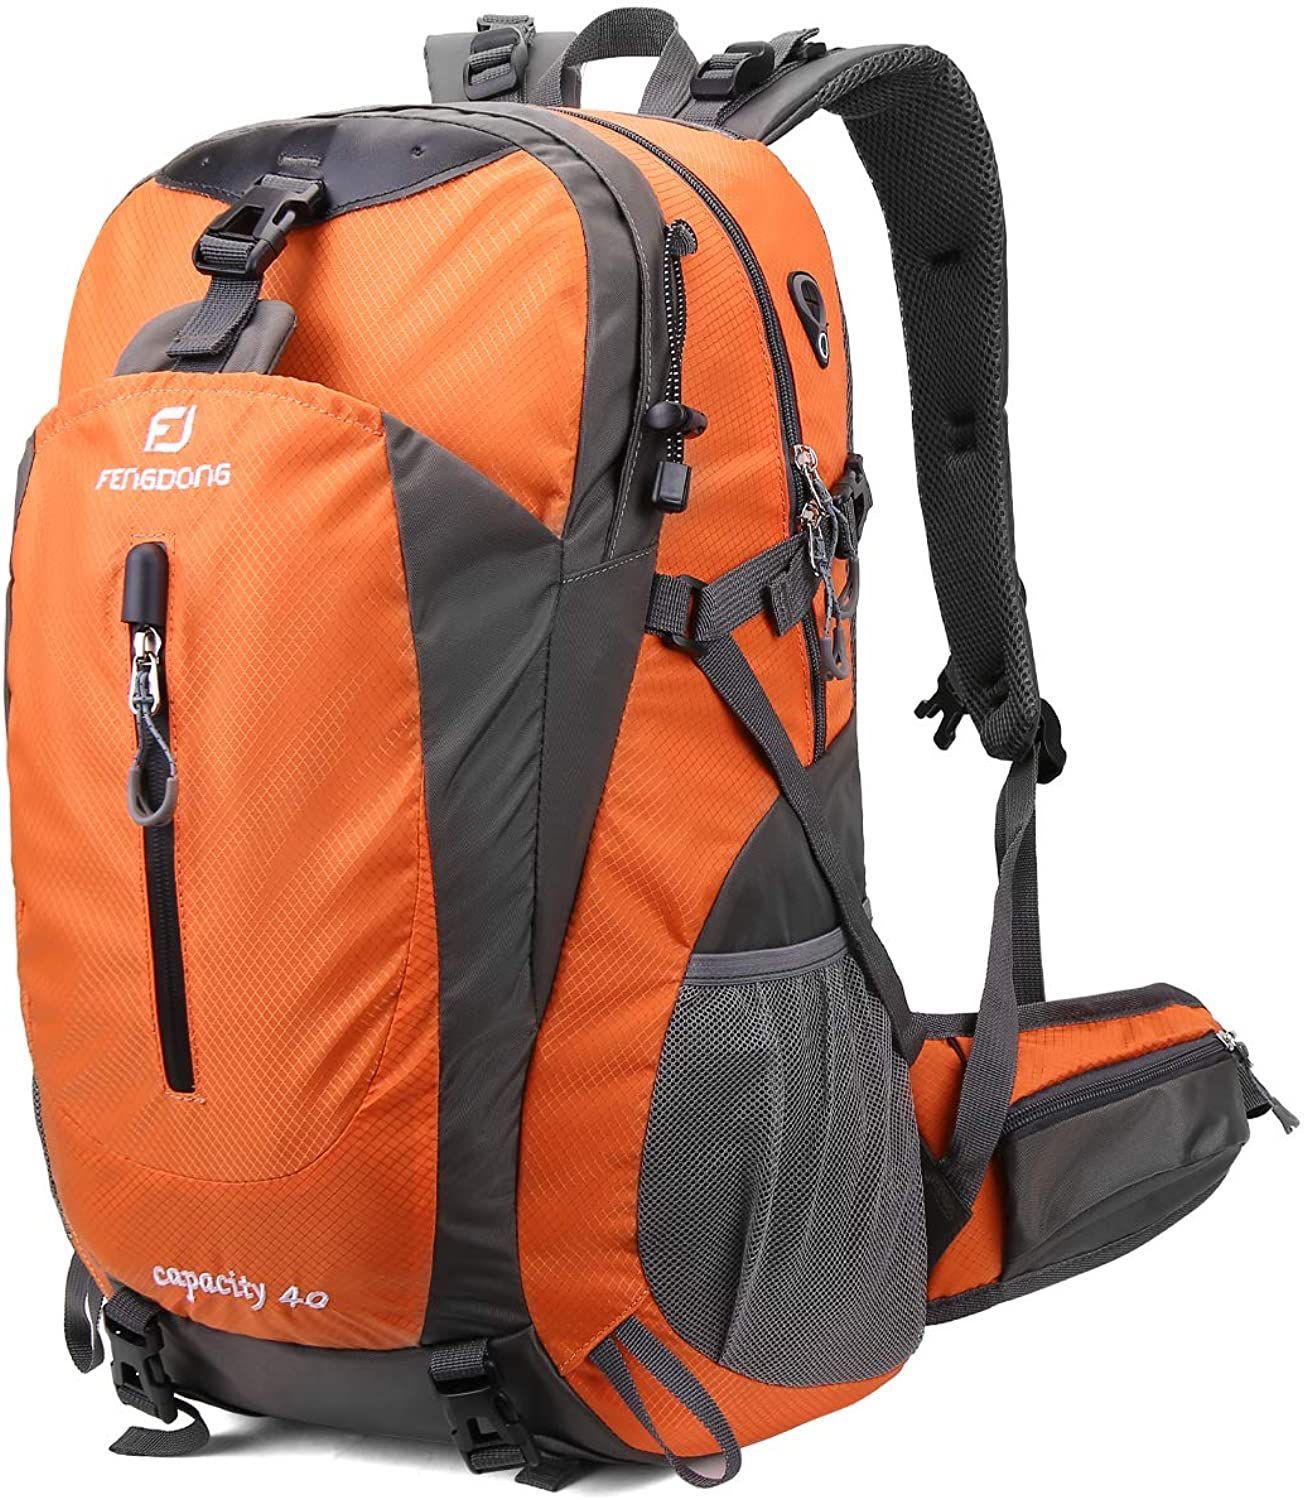 40L Waterproof Lightweight Hiking,Camping,Travel Backpack